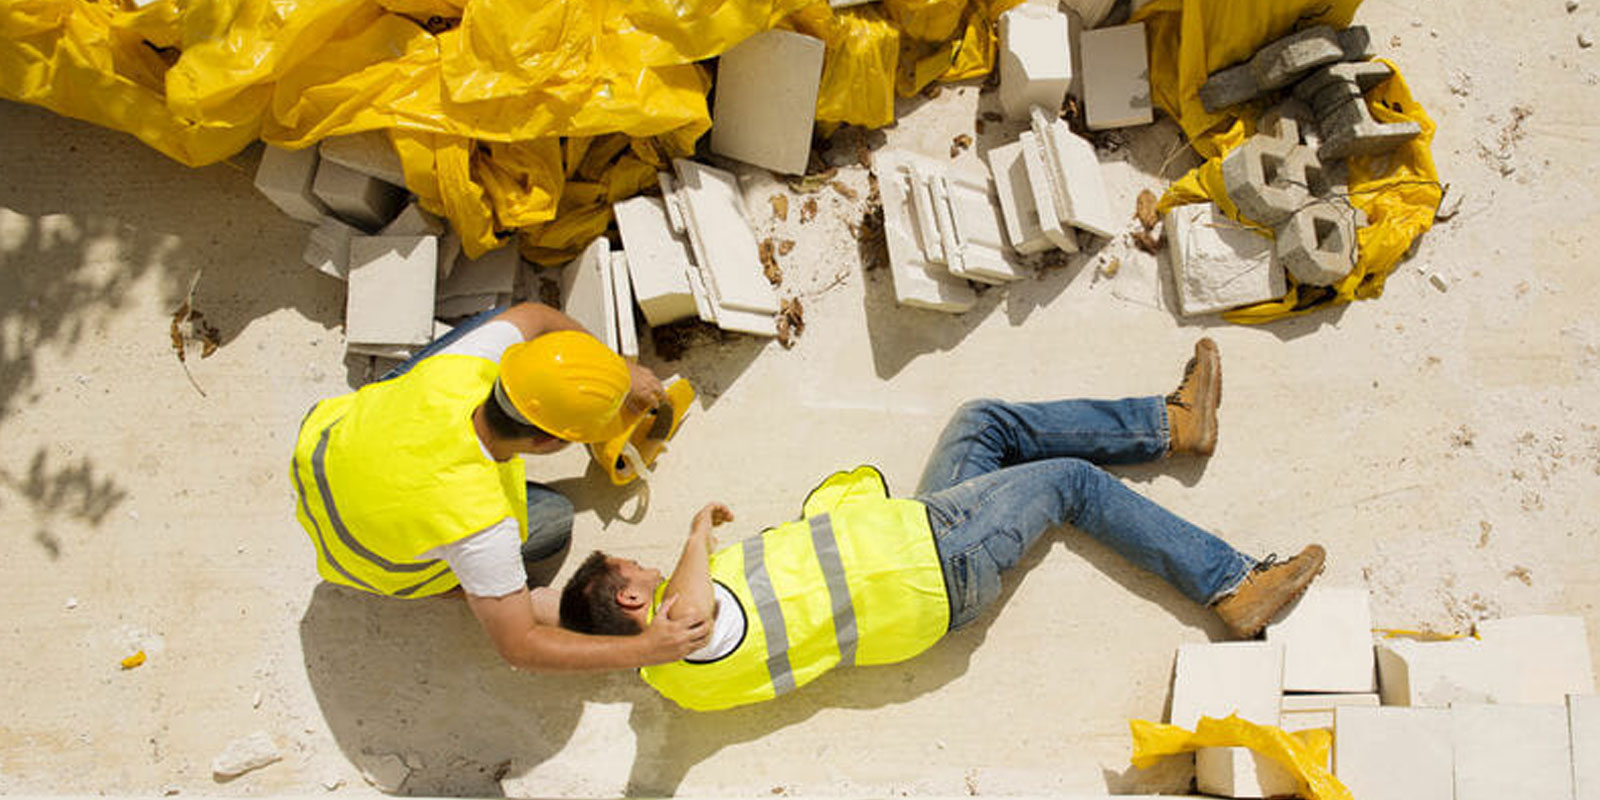 How to Prevent Slip, Trip and Fall Injuries in the Workplace